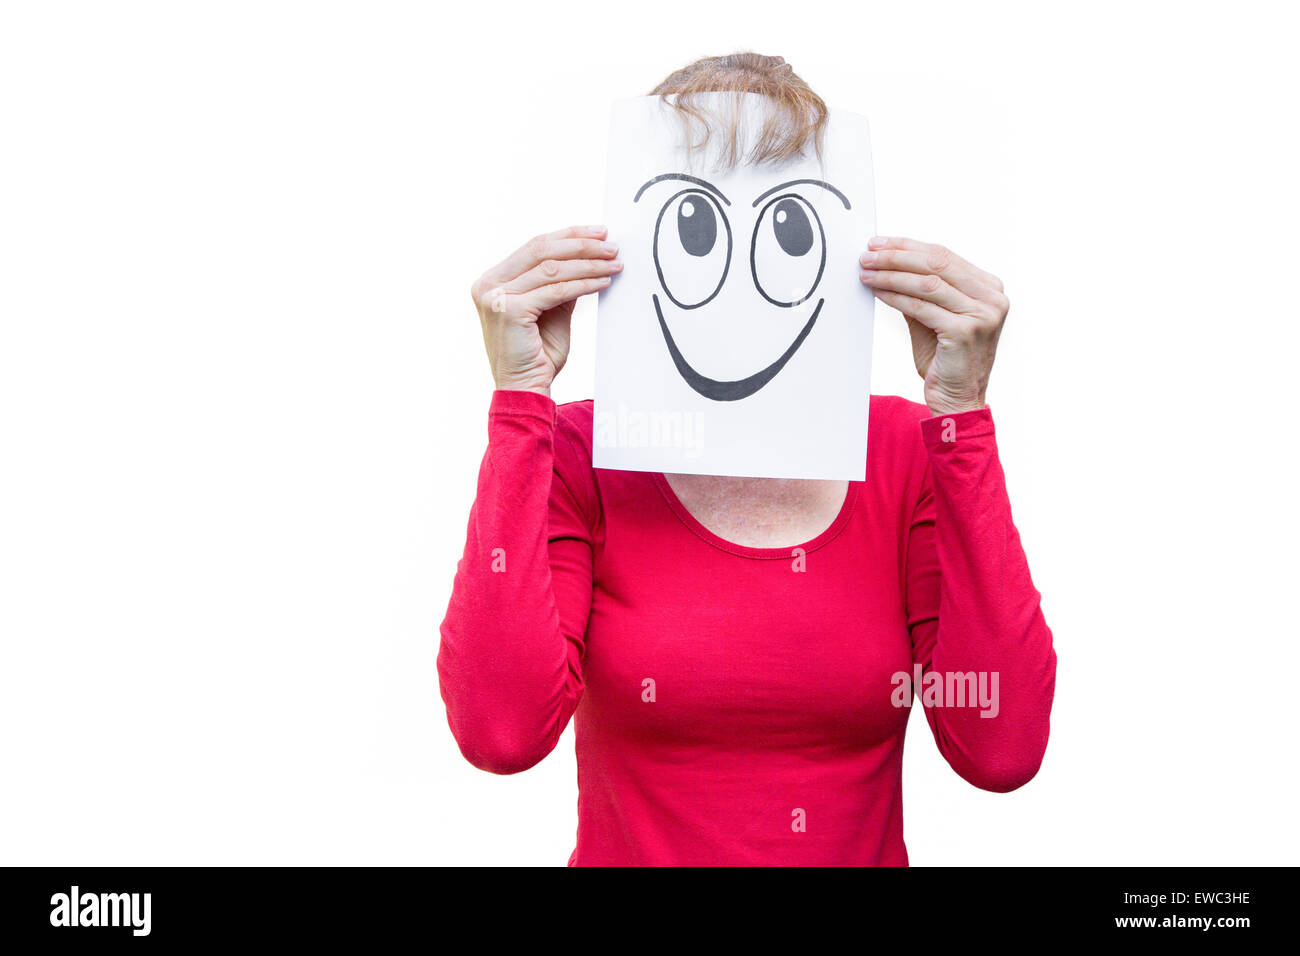 Happy woman with smiling facial expression isolated on white background Stock Photo